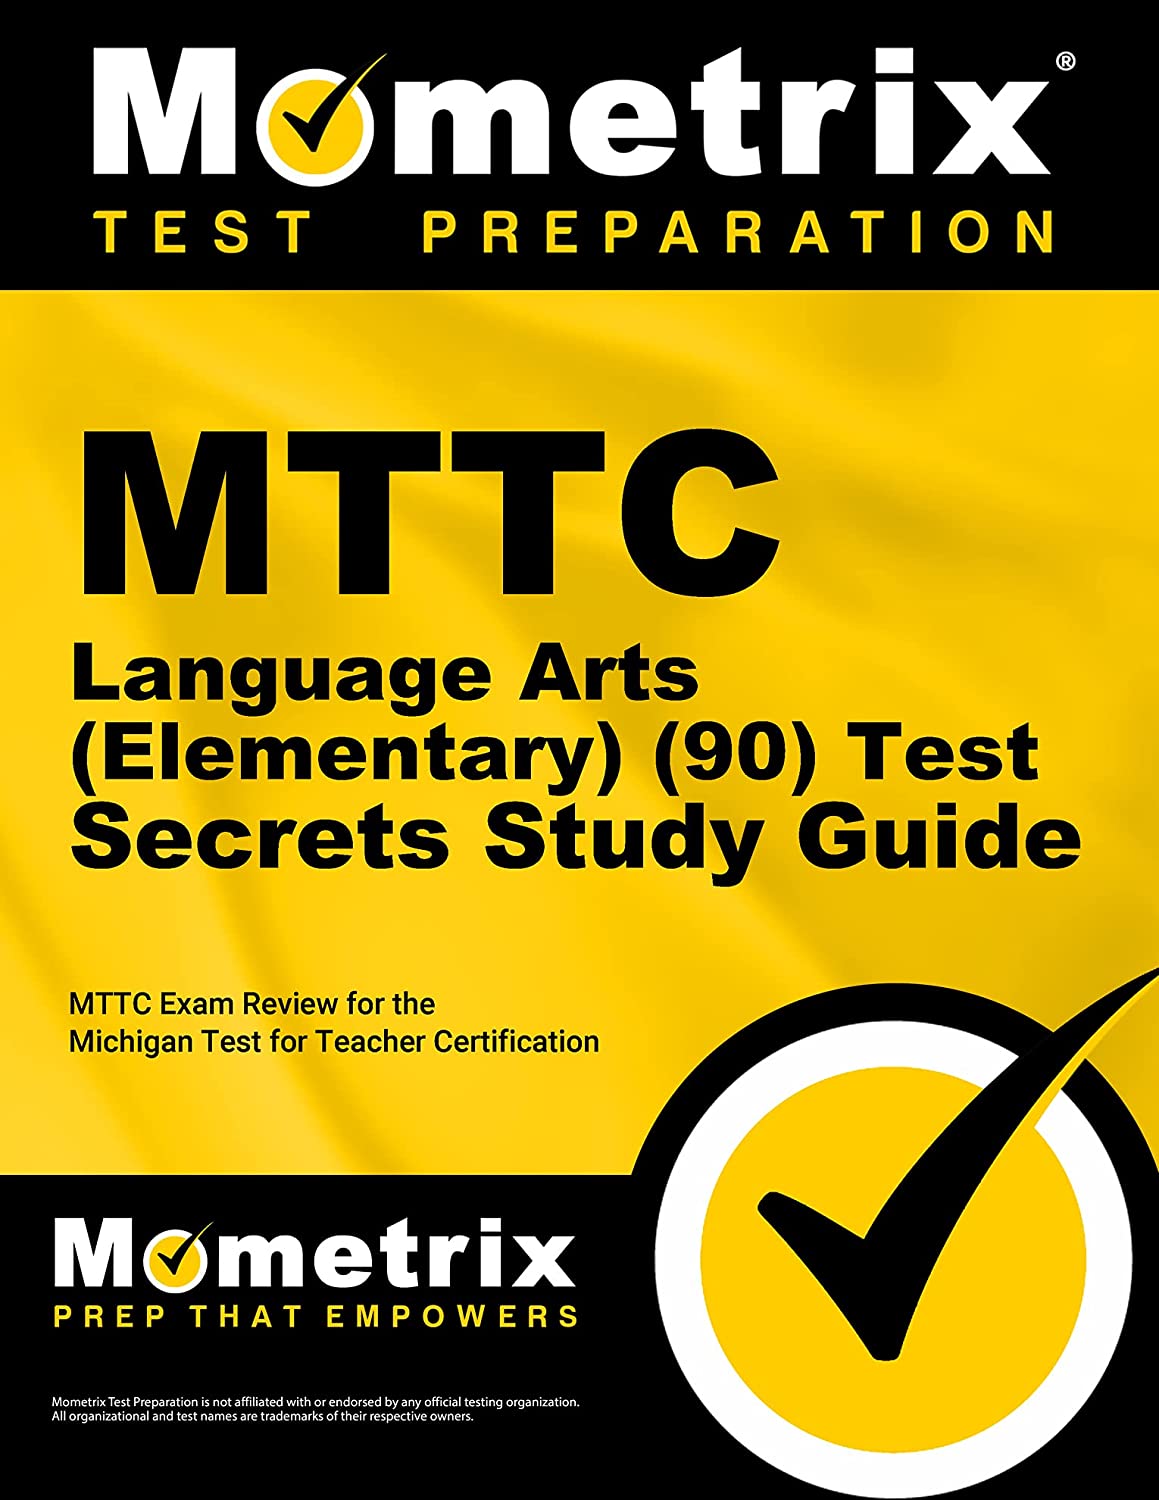 MTTC Language Arts (Elementary) (90) Test Secrets Study Guide: MTTC Exam Review for the Michigan Test for Teacher Certification